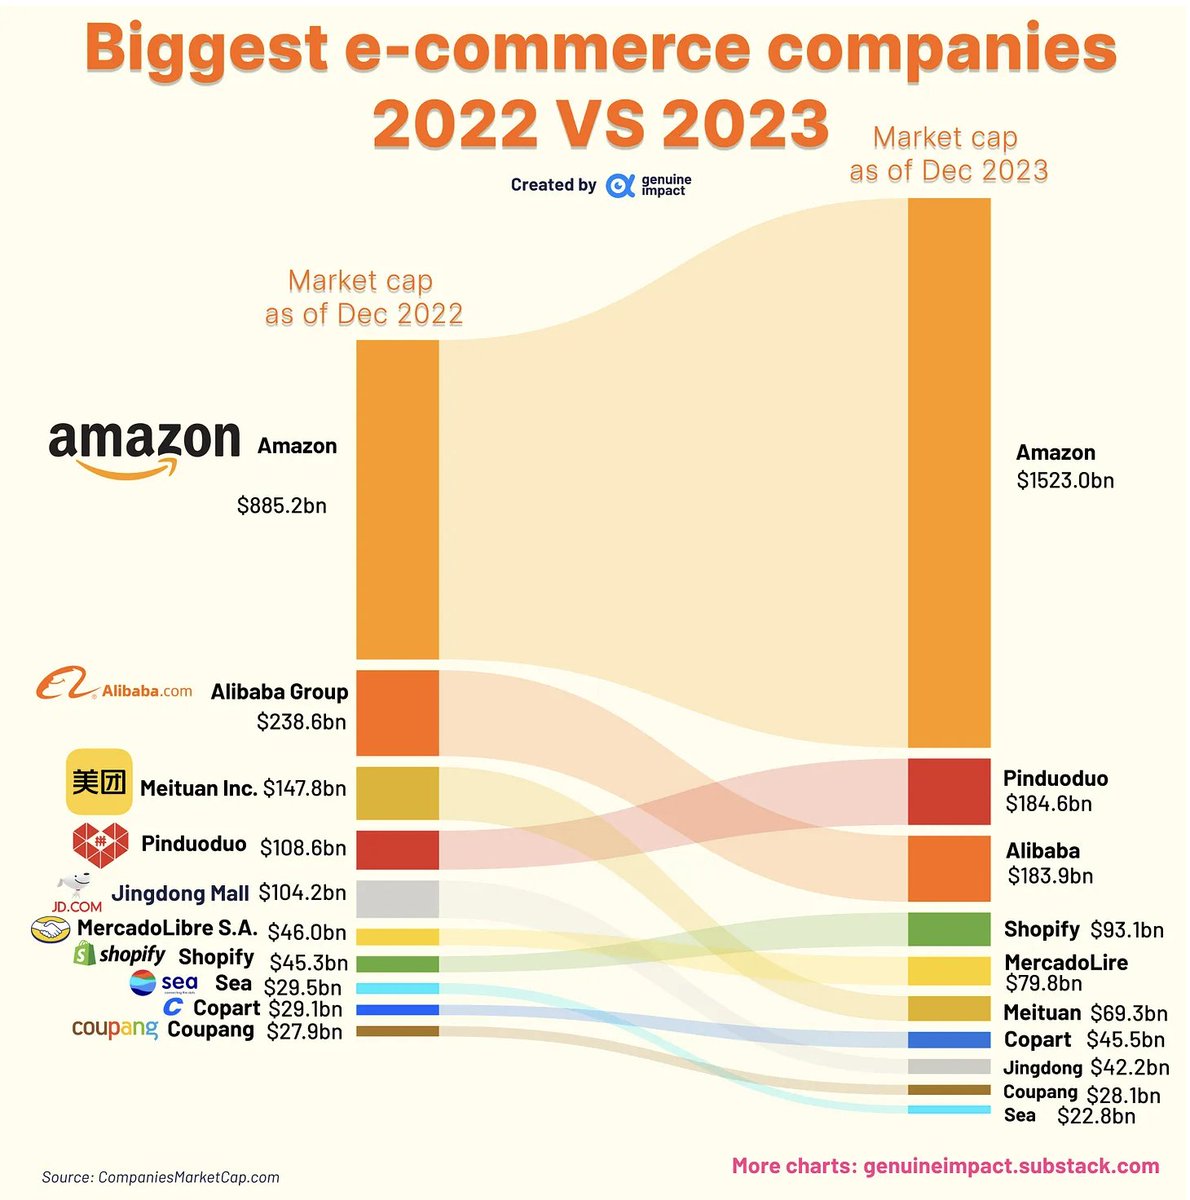 🟠Amazon's market cap skyrockets from $885.2B in 2022 to a staggering $1523.0B in 2023, reinforcing its dominant position. Surprisingly, 🔴Pinduoduo emerges as a rising star, surpassing Alibaba to secure the second position in market cap😮 #ecommerce #amazon #pinduoduo #alibaba